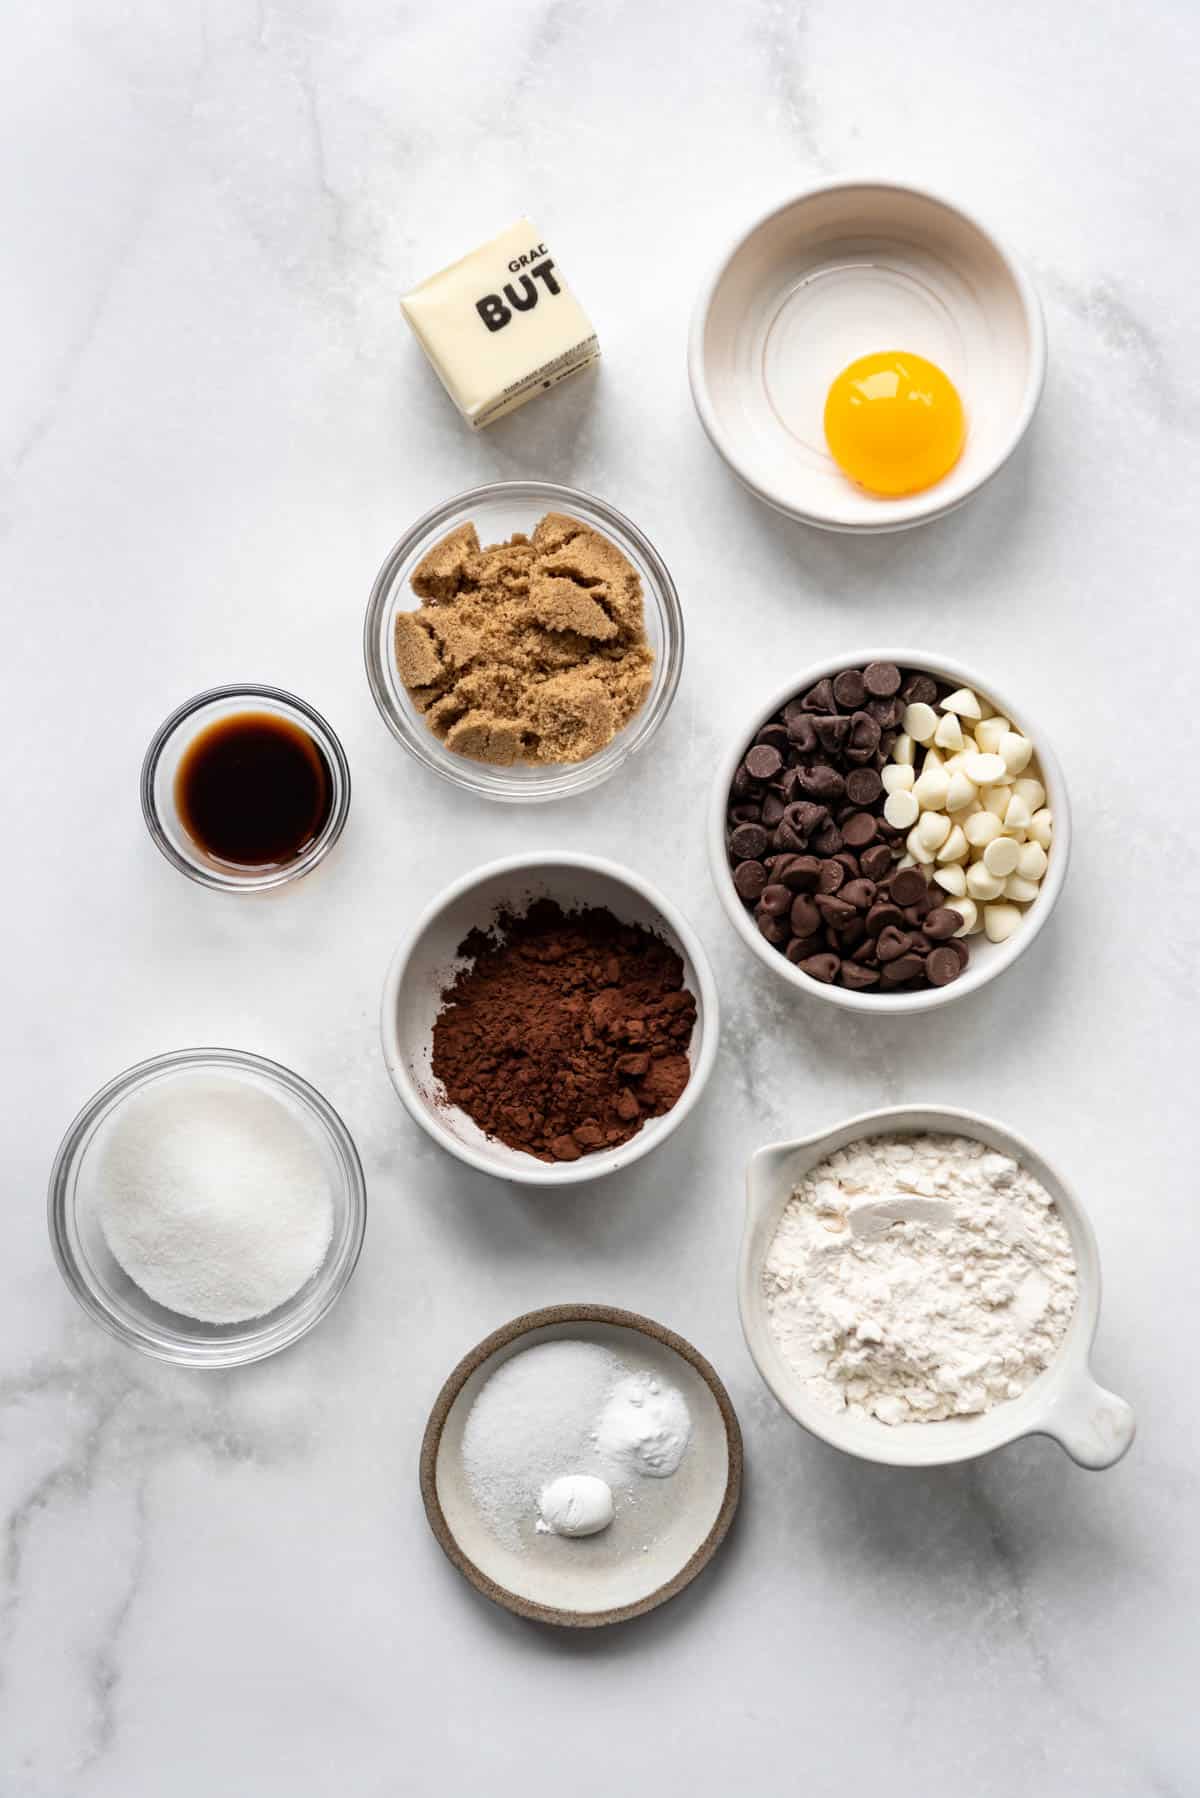 Ingredients for a small batch of triple chocolate cookies.